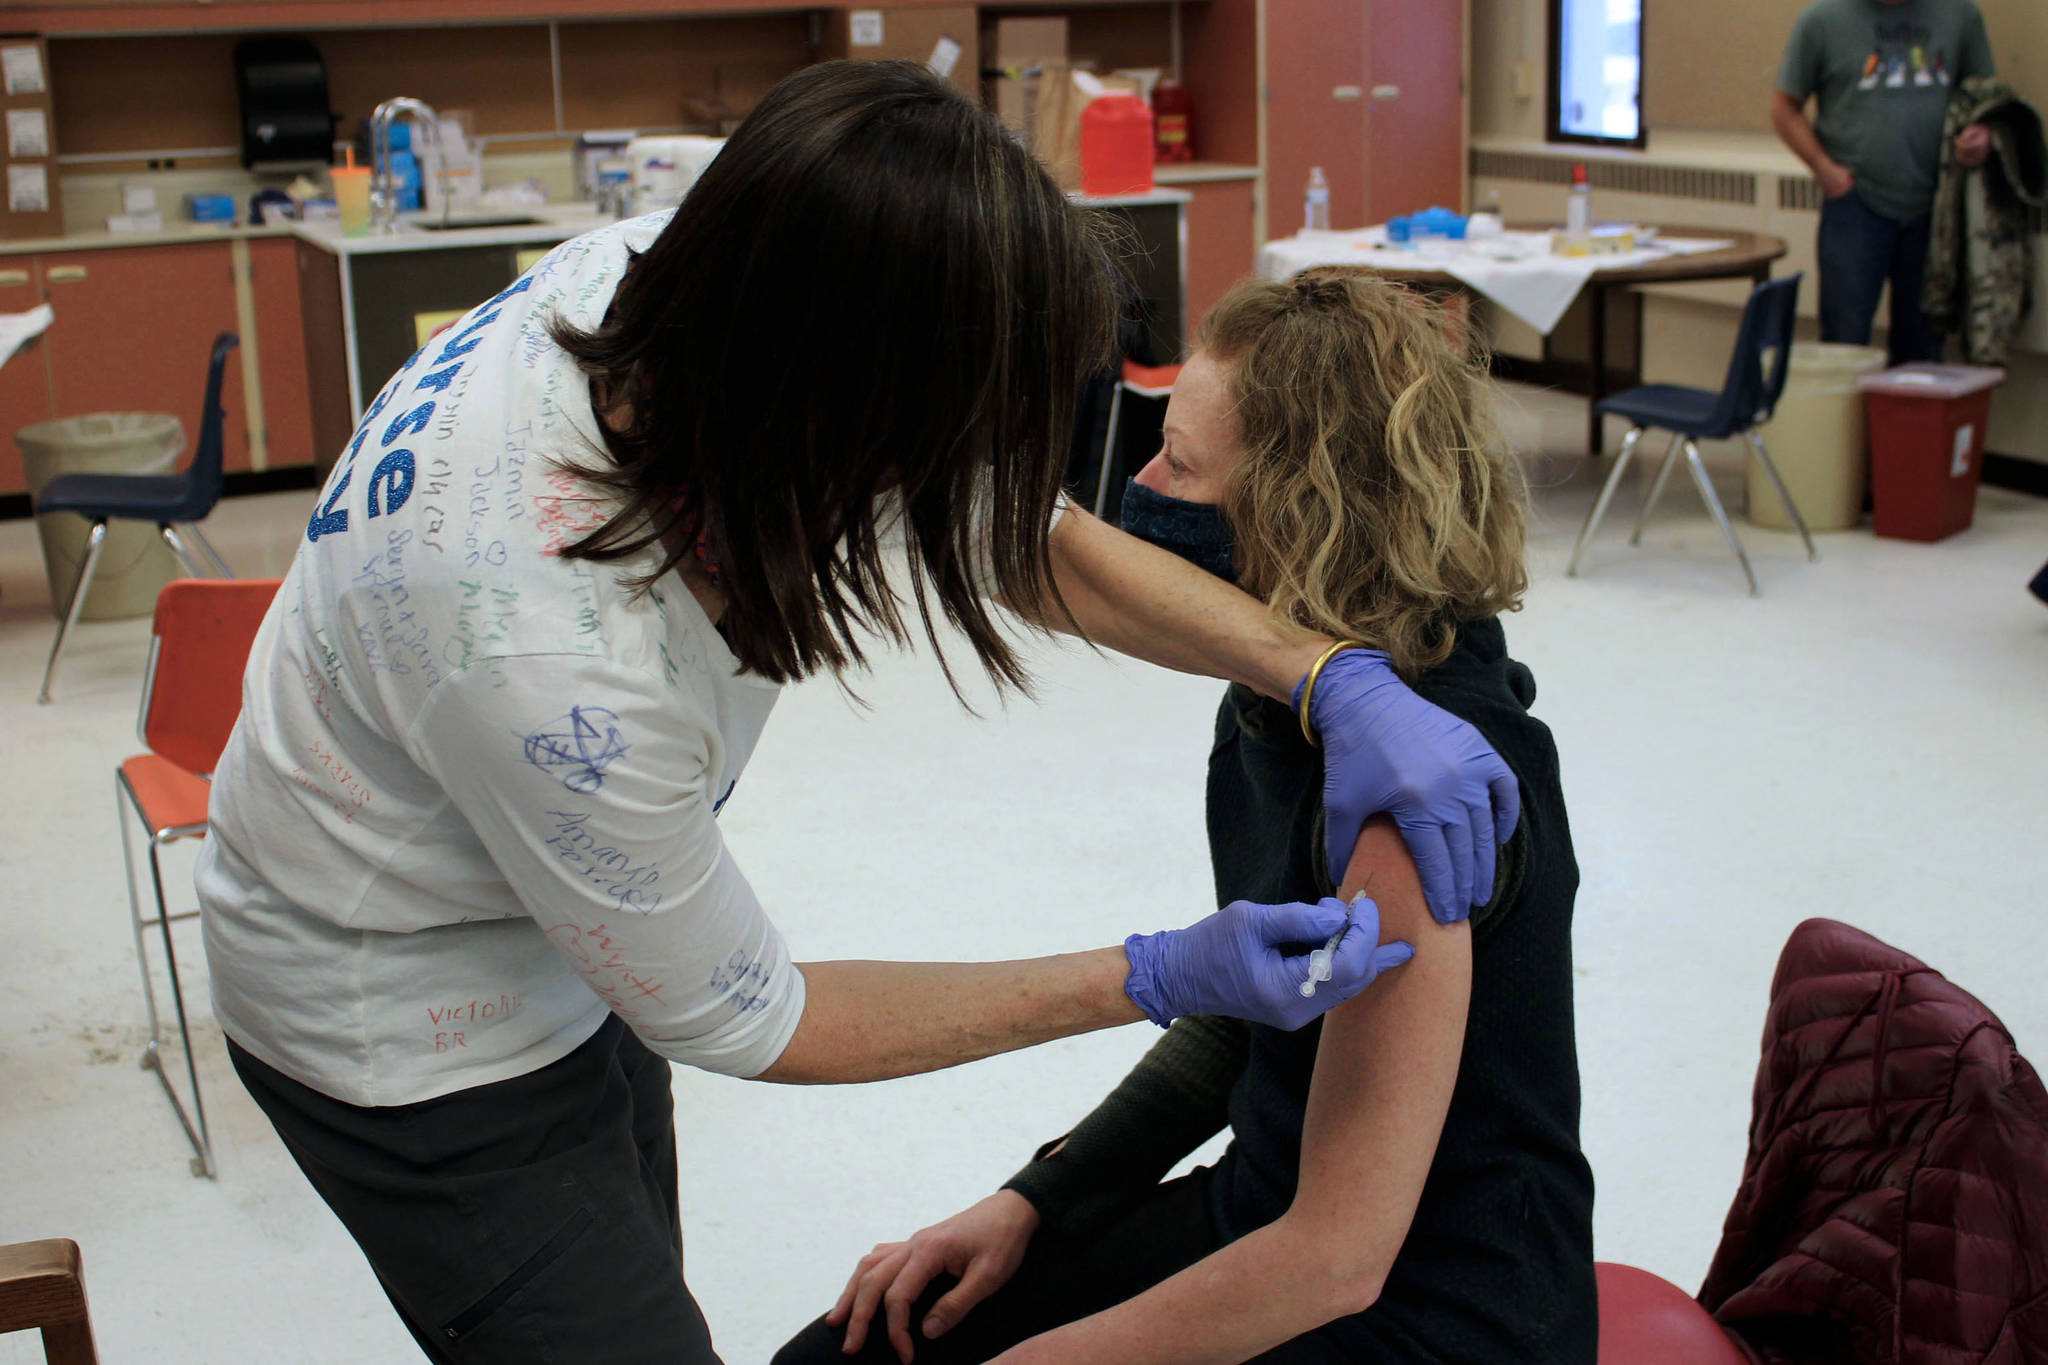 Tracy Silta (left) administers a dose of a COVID-19 vaccine to Melissa Linton during a vaccine clinic at Soldotna Prep School on Friday, Feb. 26 in Soldotna, Alaska. (Ashlyn O’Hara/Peninsula Clarion)